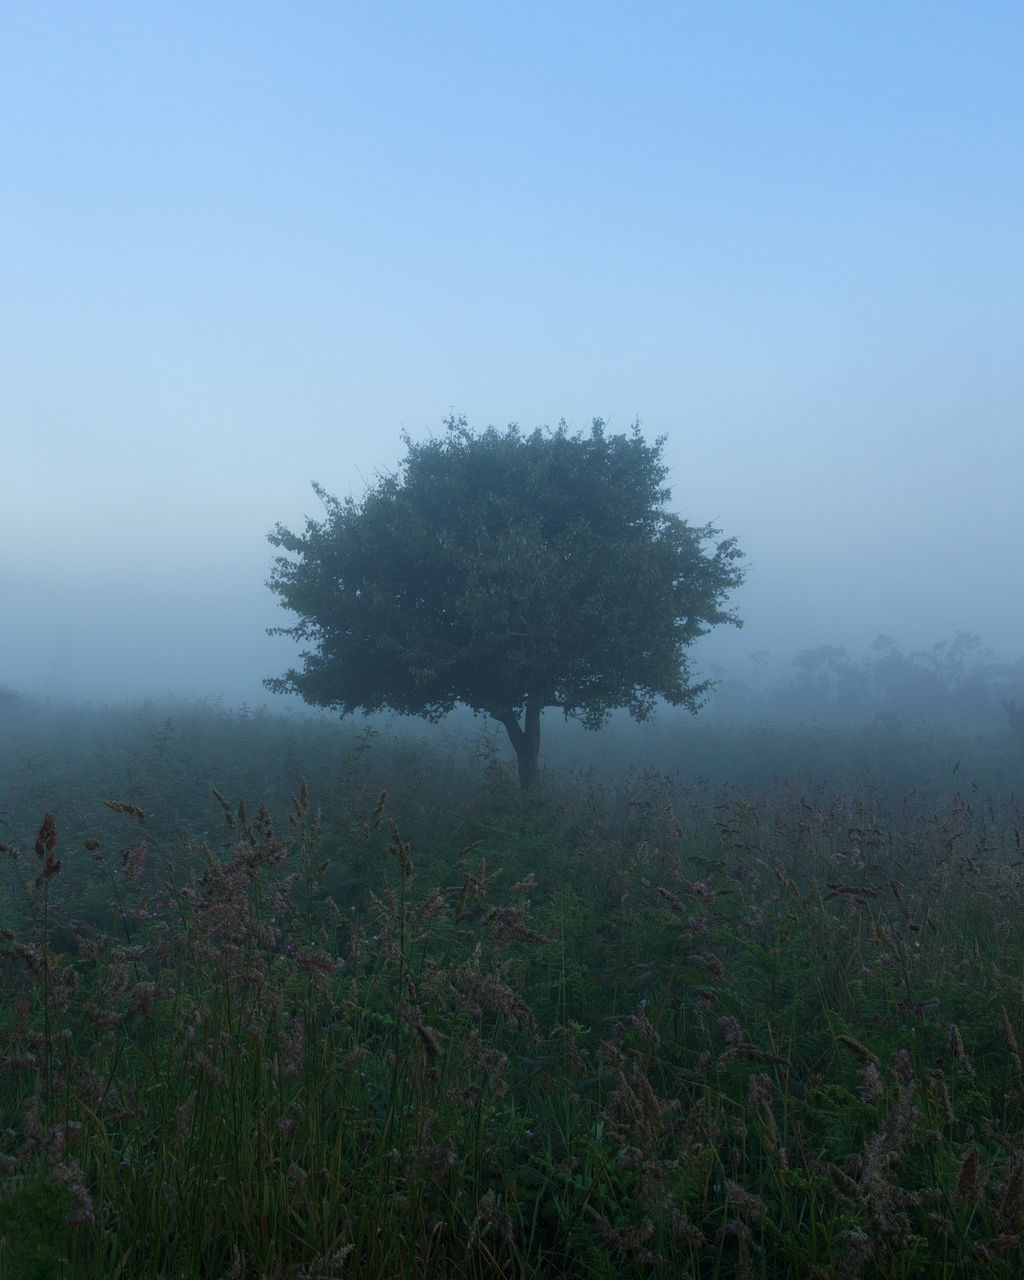 plant, fog, tree, beauty in nature, tranquility, land, growth, field, tranquil scene, sky, nature, environment, landscape, no people, scenics - nature, non-urban scene, grass, day, outdoors, hazy, isolated